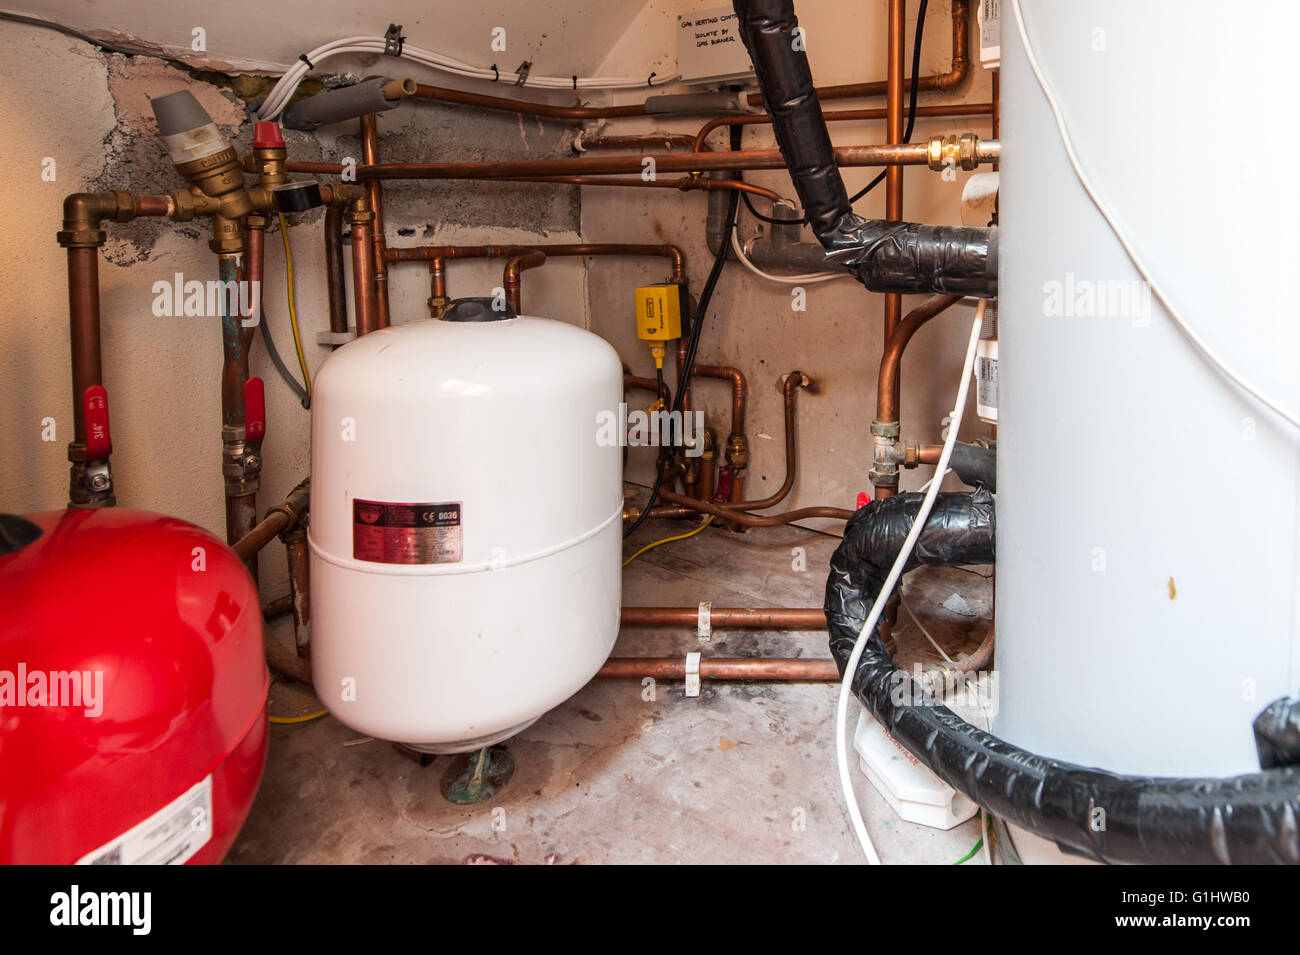 A domestic plumbing zoning system for central heating. Stock Photo